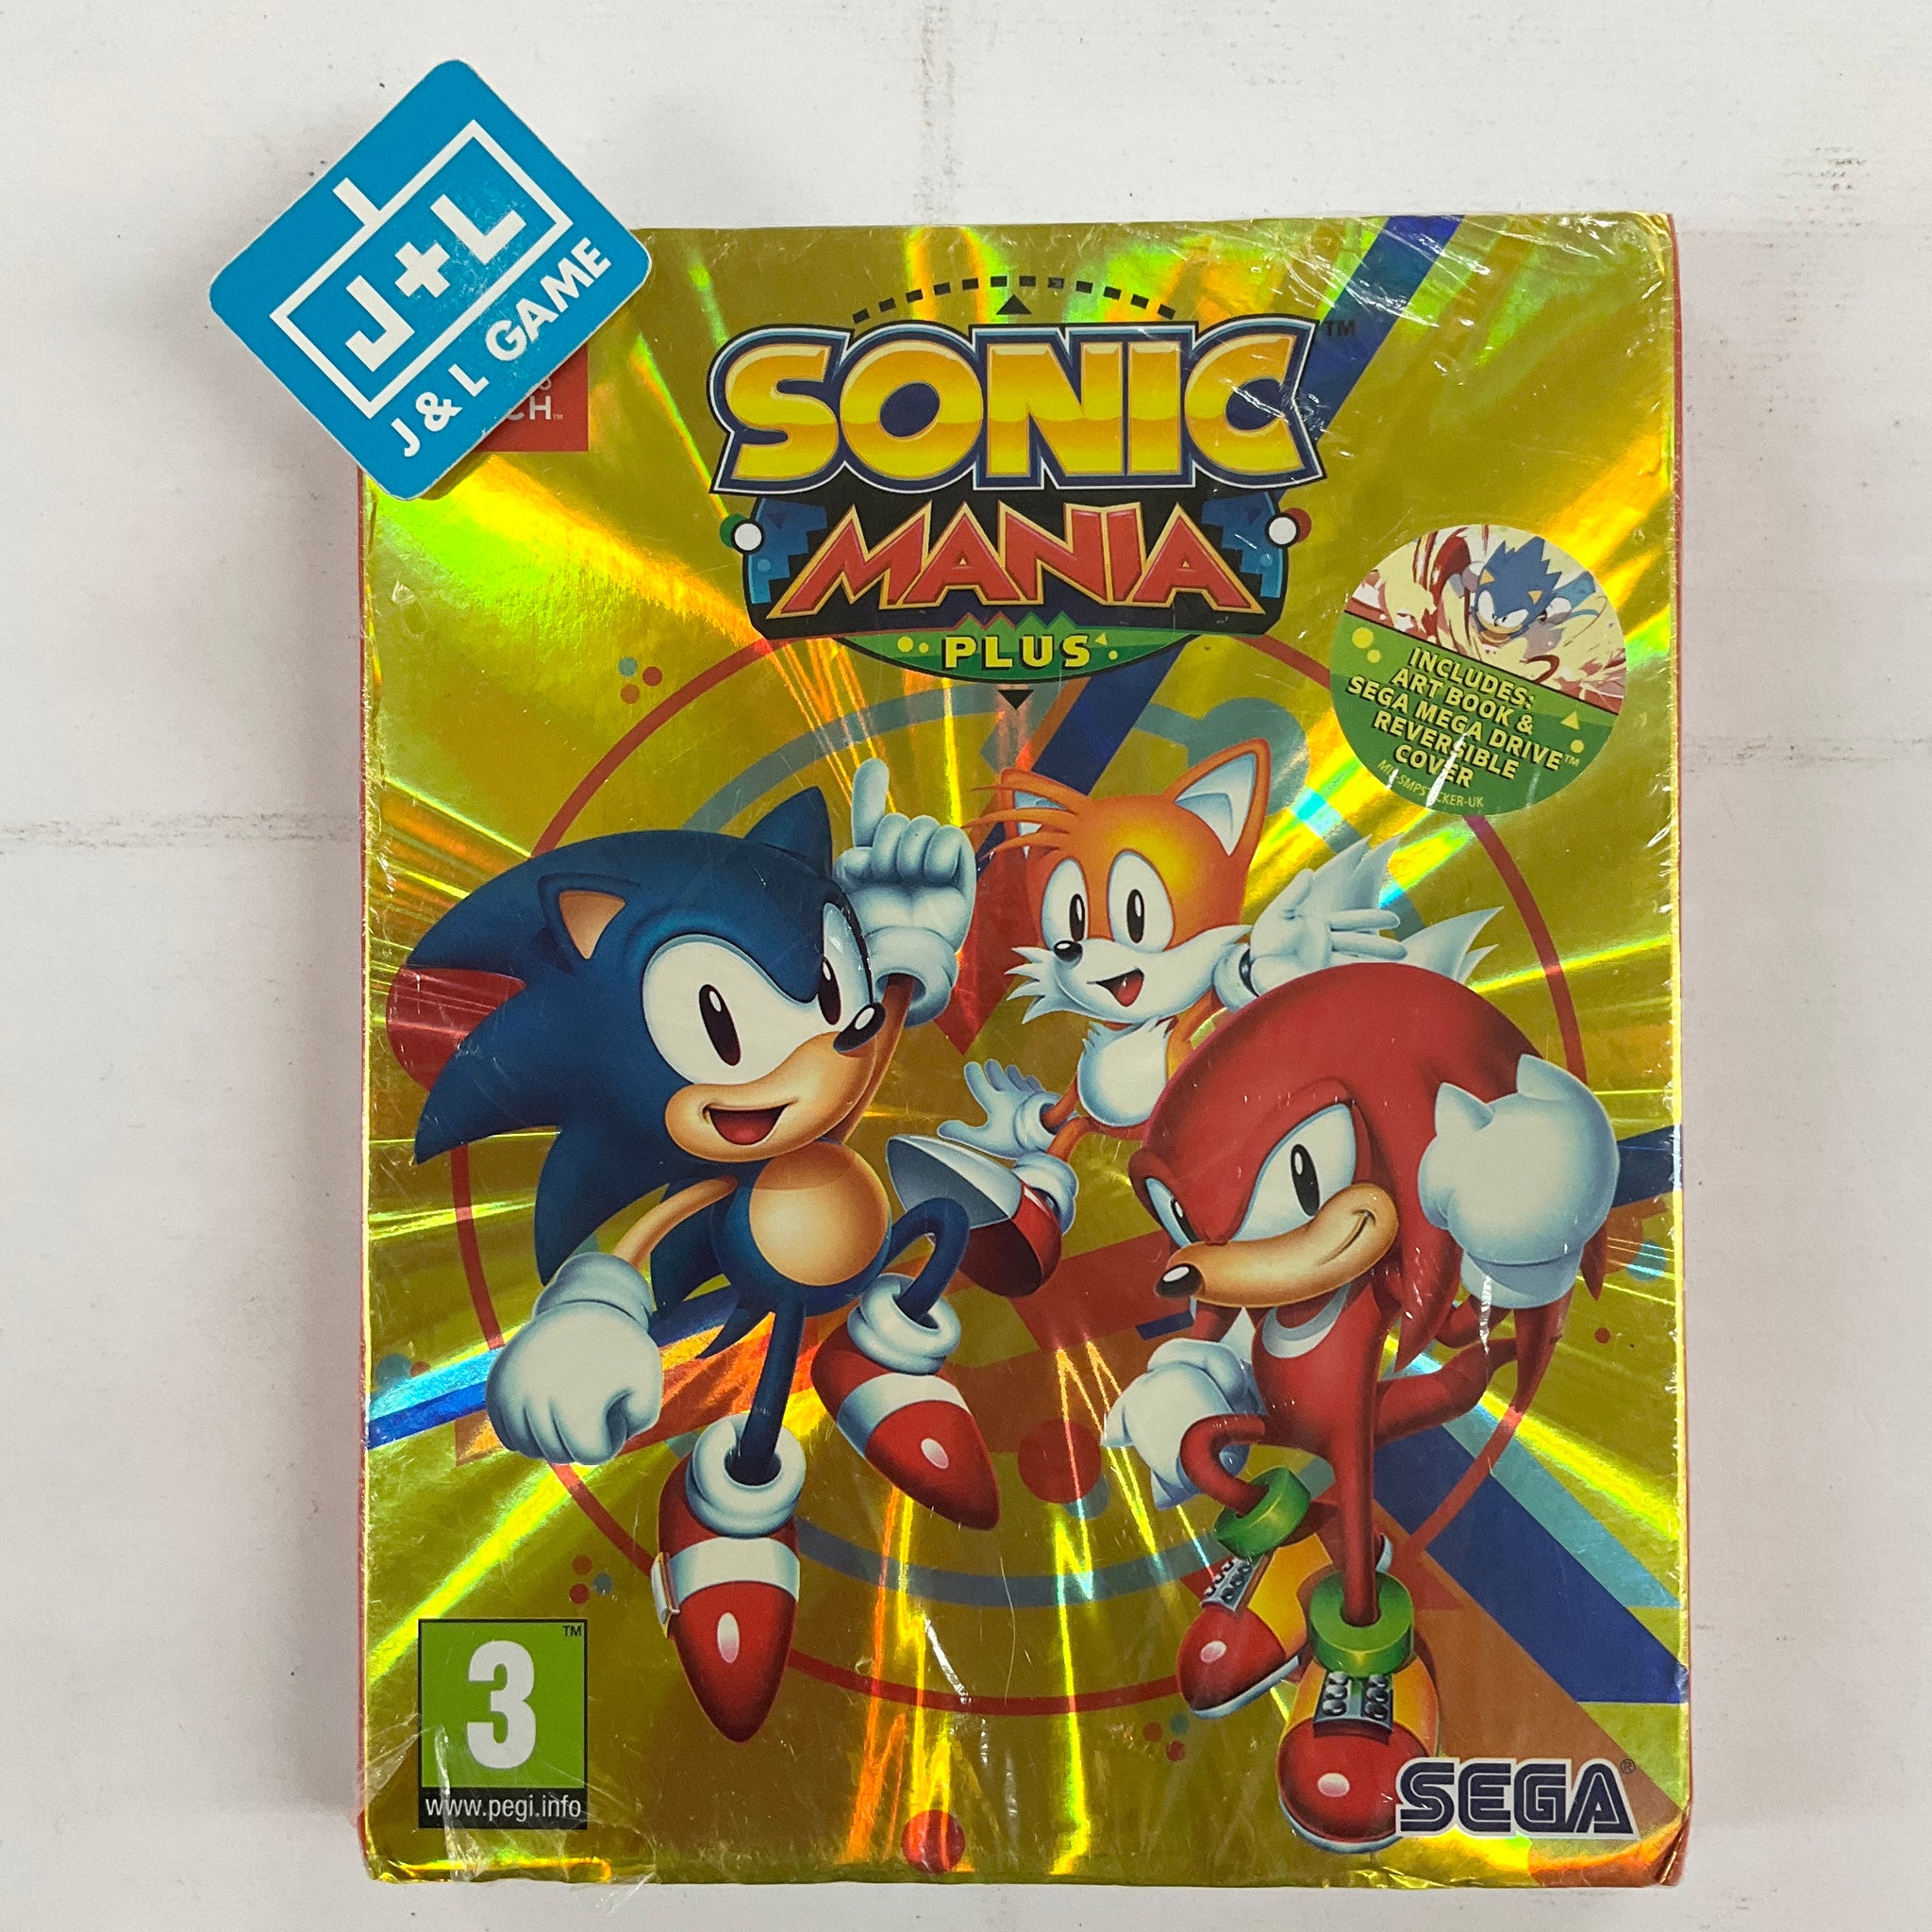 Sonic Mania: Collector's Edition (Sony PlayStation 4, 2017) for sale online